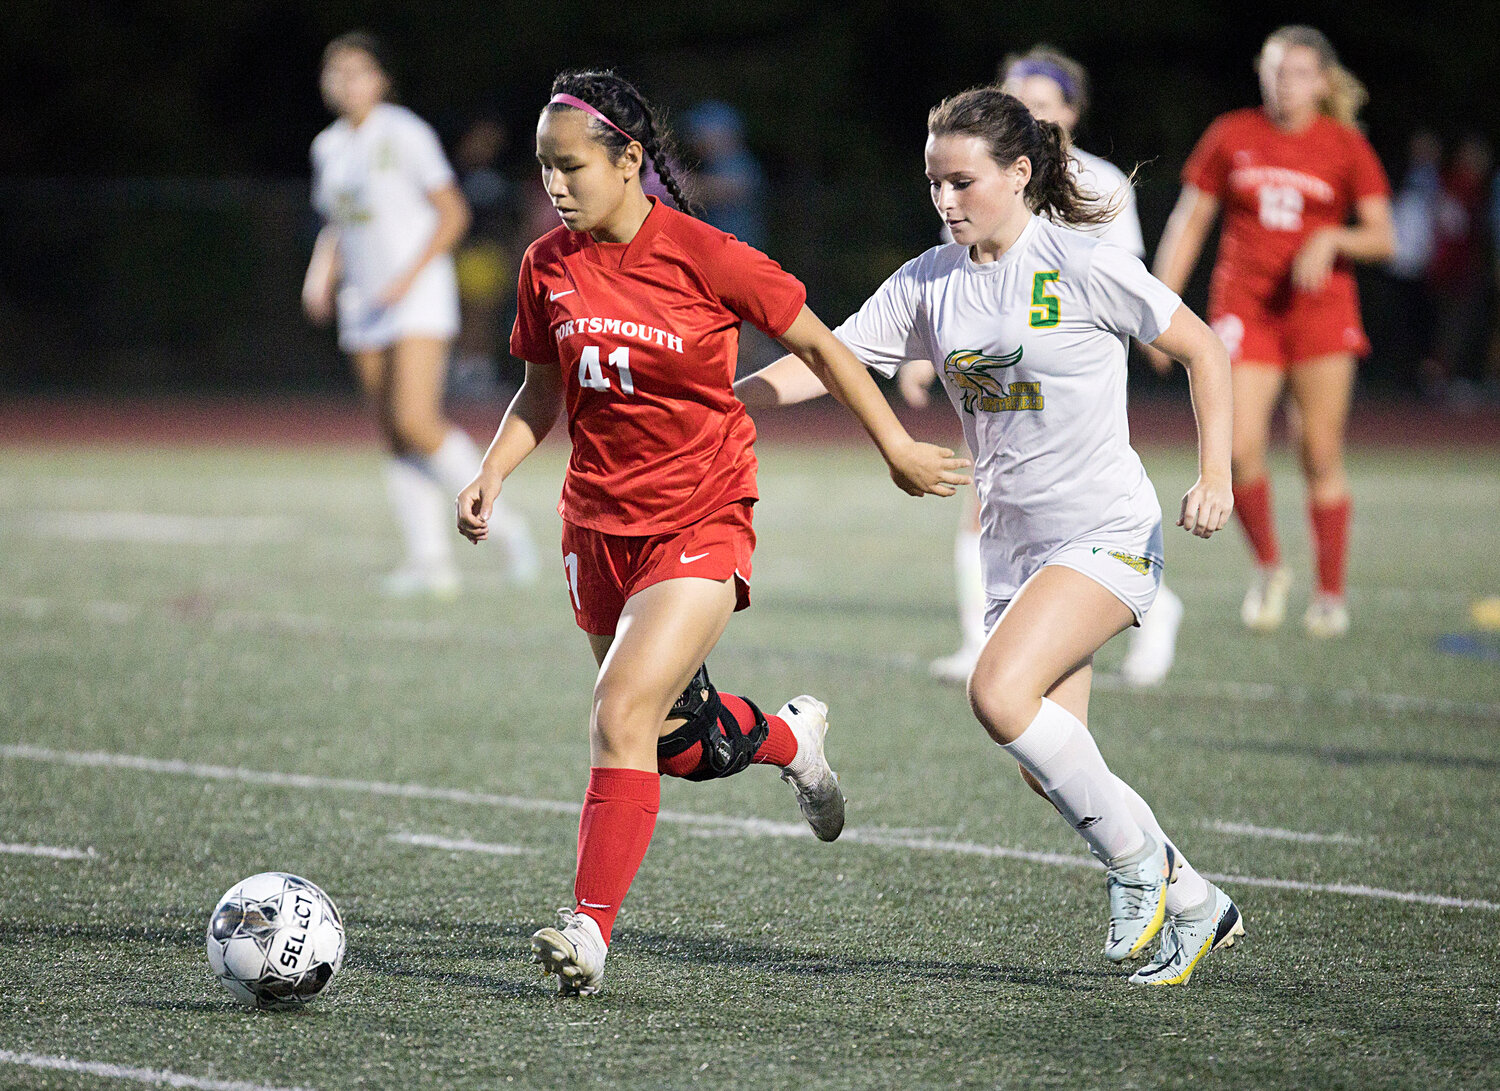 Elena Sun is pressured by a North Smithfield defender while controlling the ball for Portsmouth.